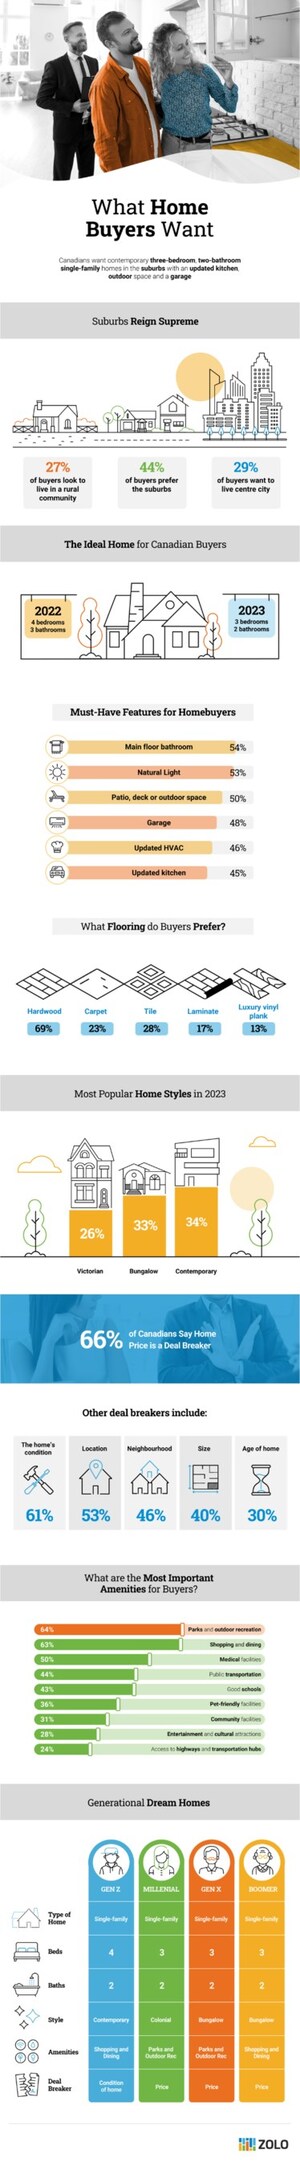 What Homebuyers Want: Survey Reveals Key Insights for Sellers in the Canadian Real Estate Market